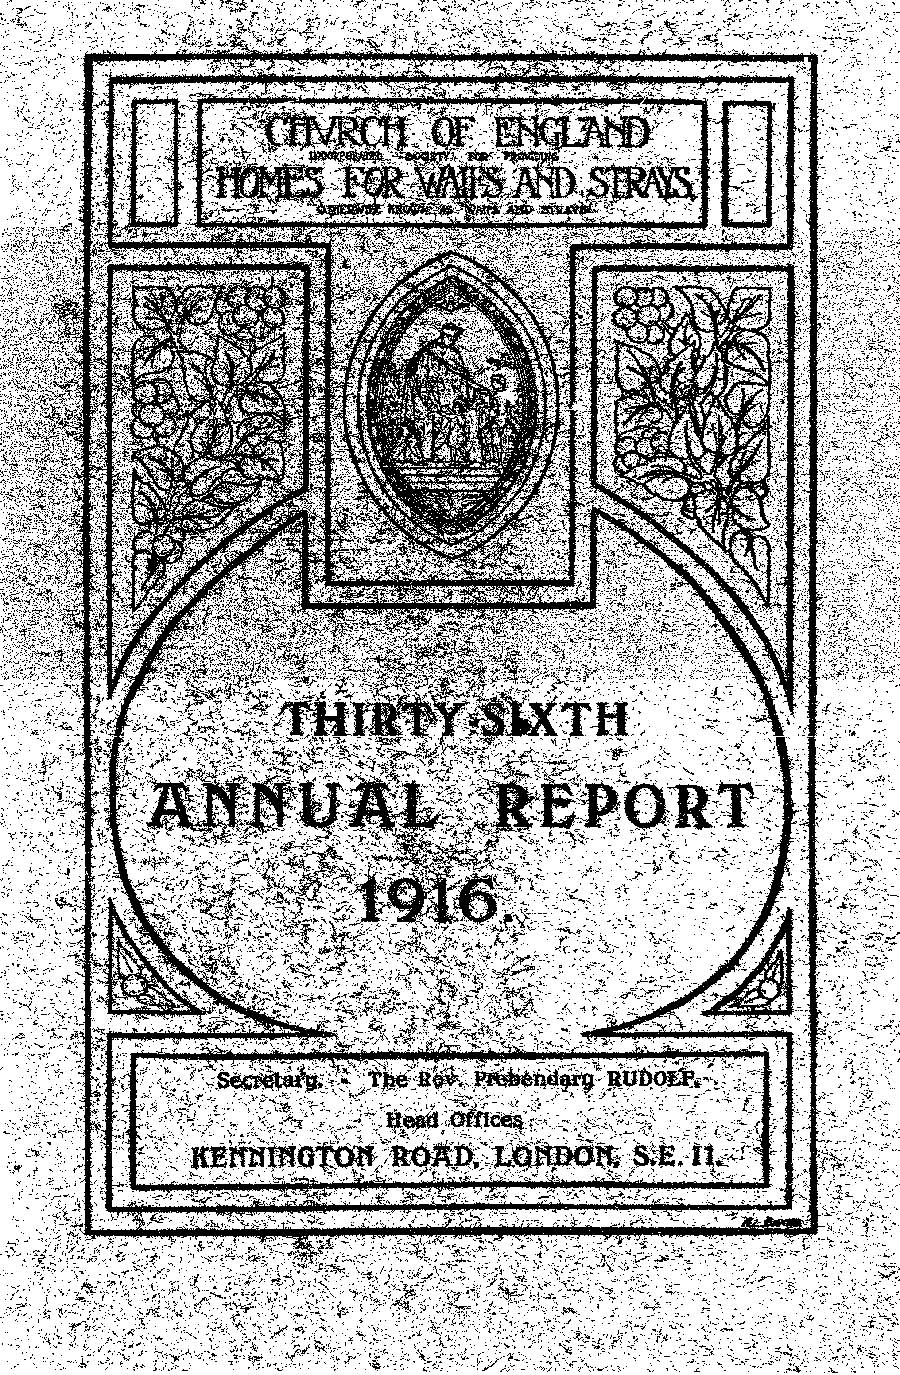 Annual Report 1916 - page 1